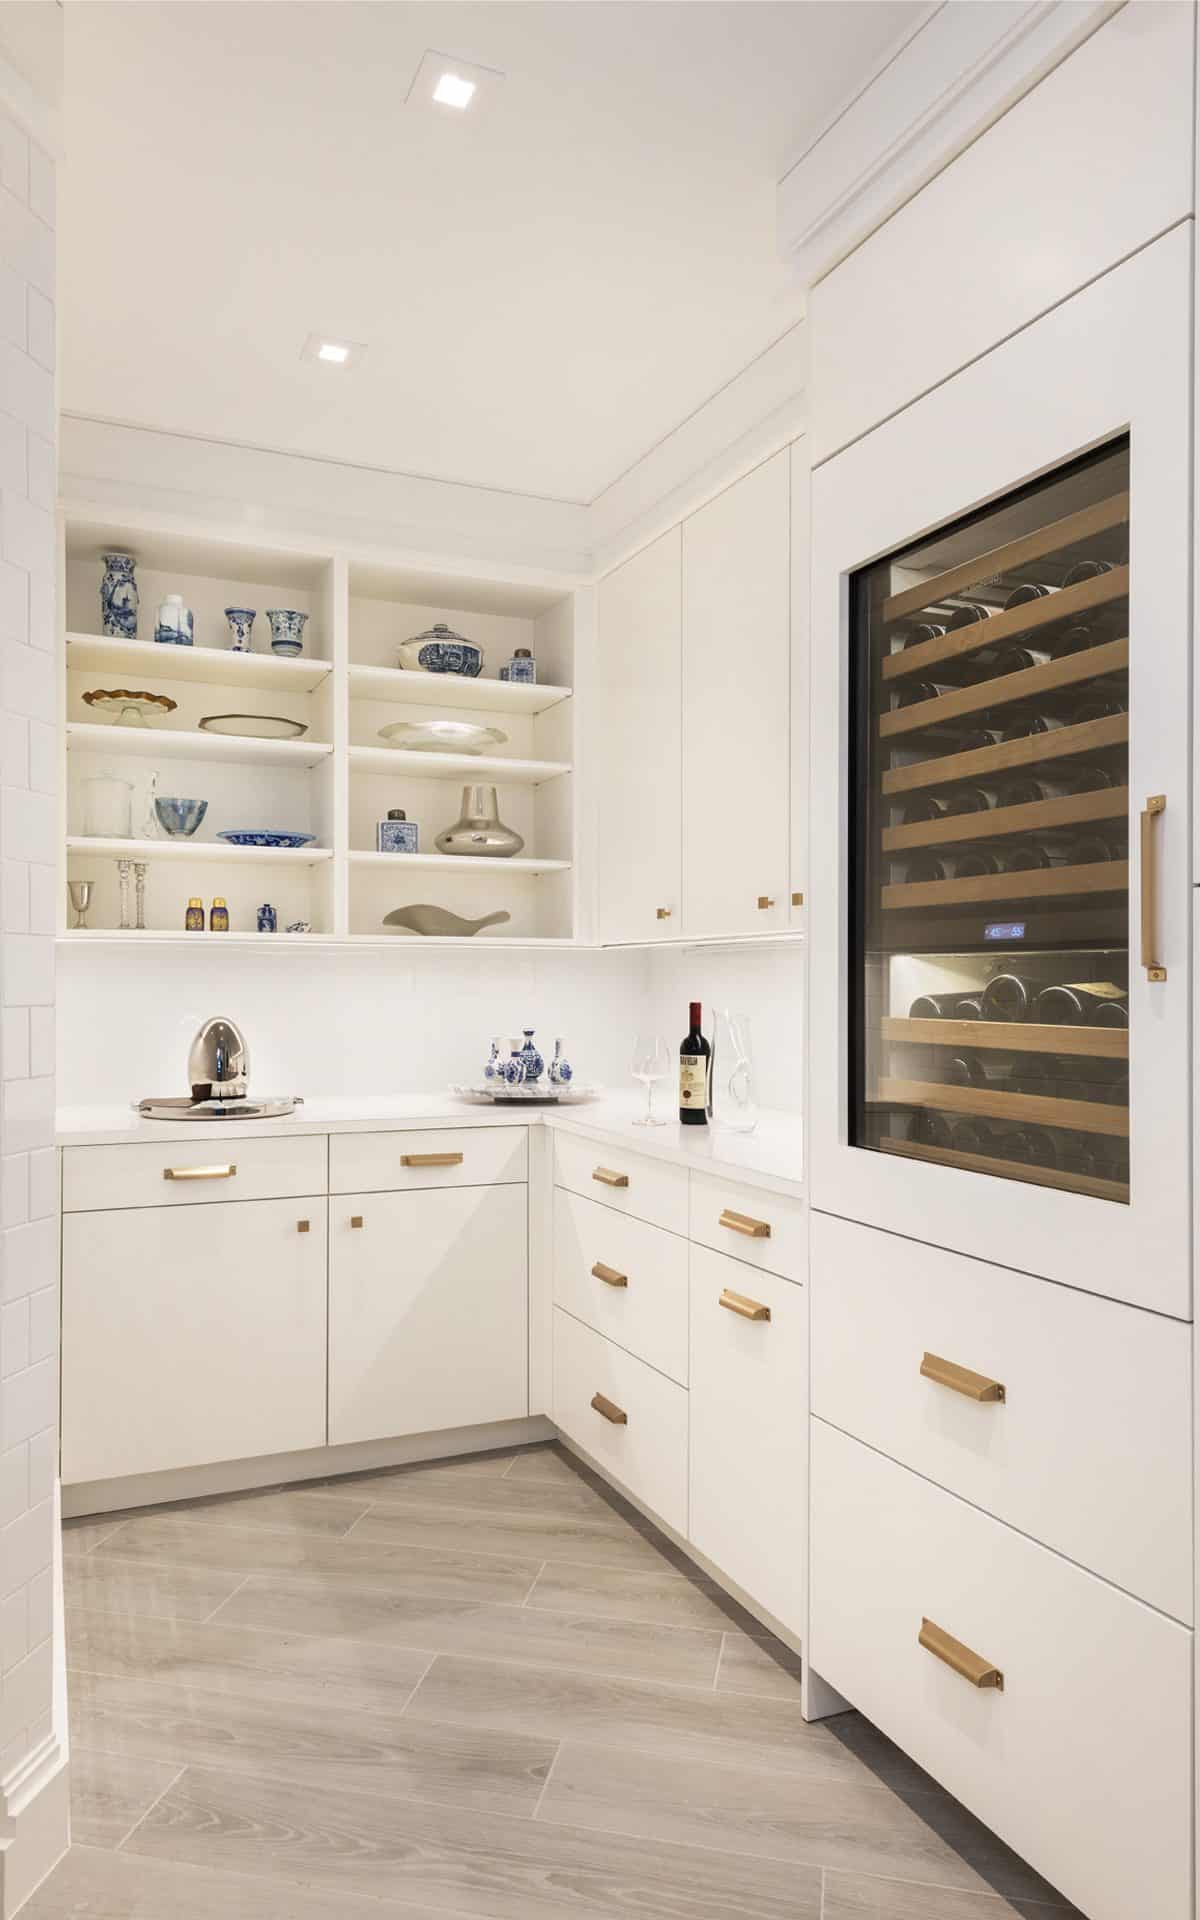 Kitchen features white Bilotta cabinets with gold drawer pulls and custom built-in wine storage and cooler.